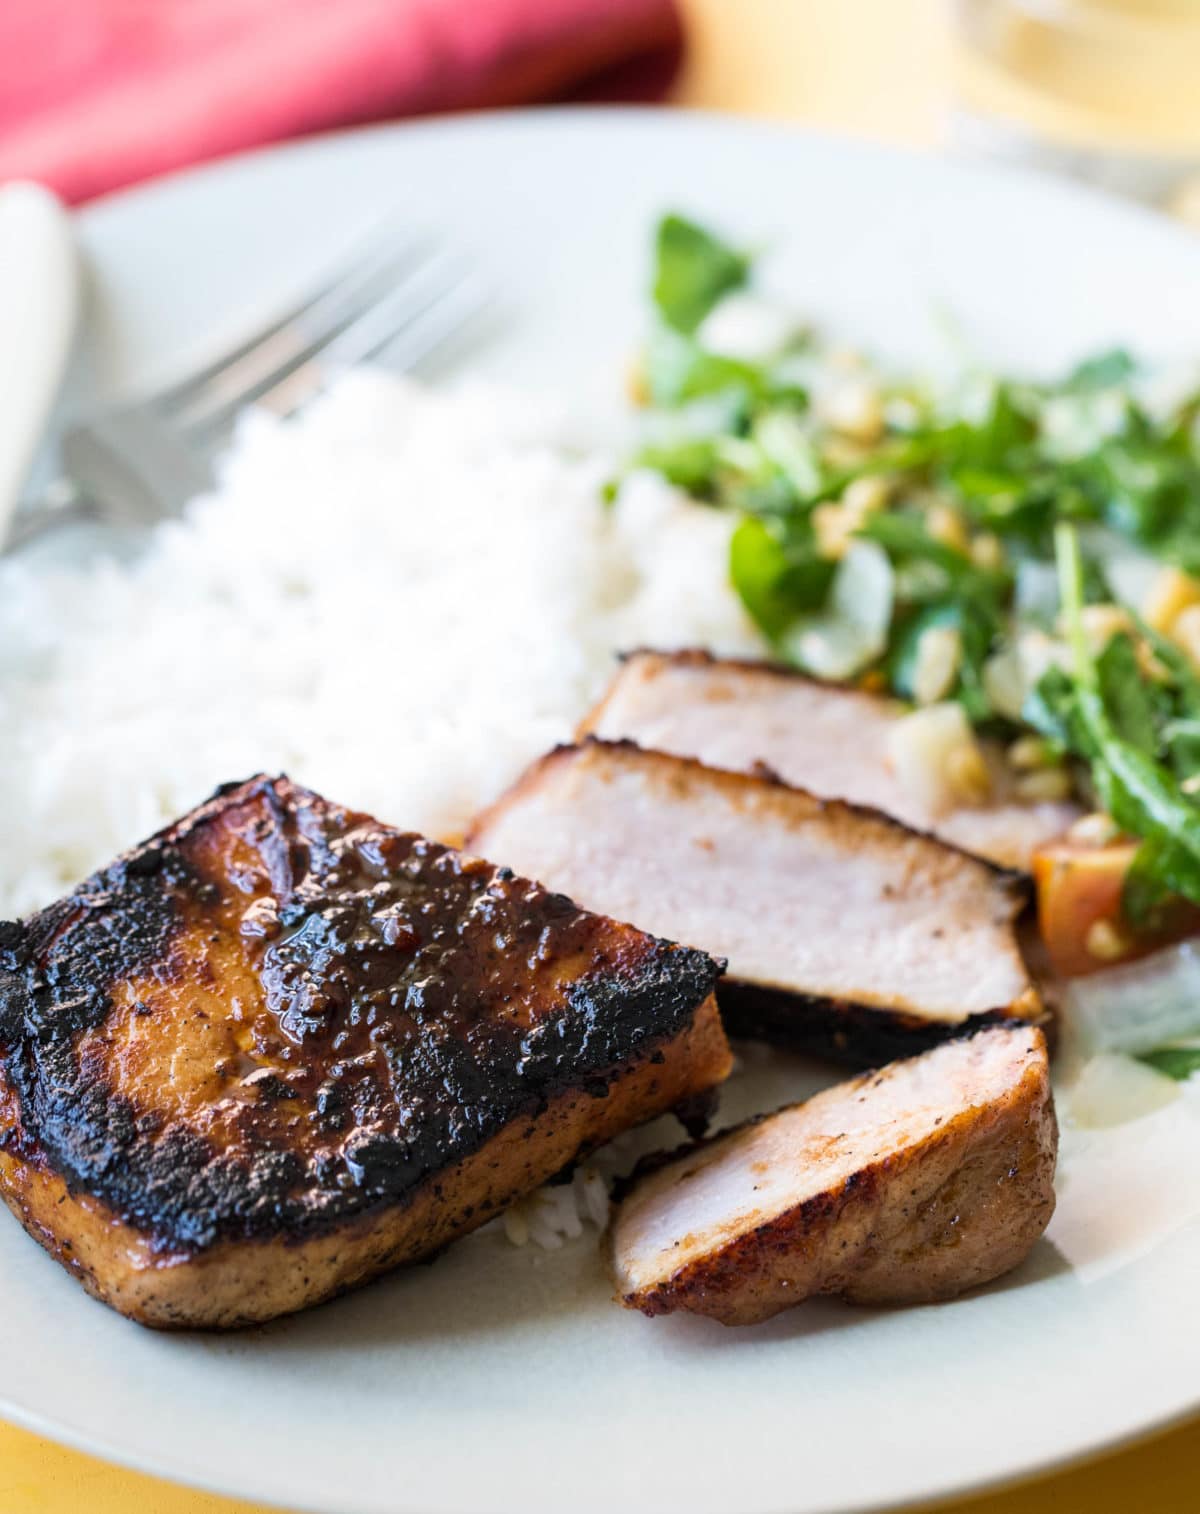 Sliced Korean Pork Chop with rice and salad on a plate.